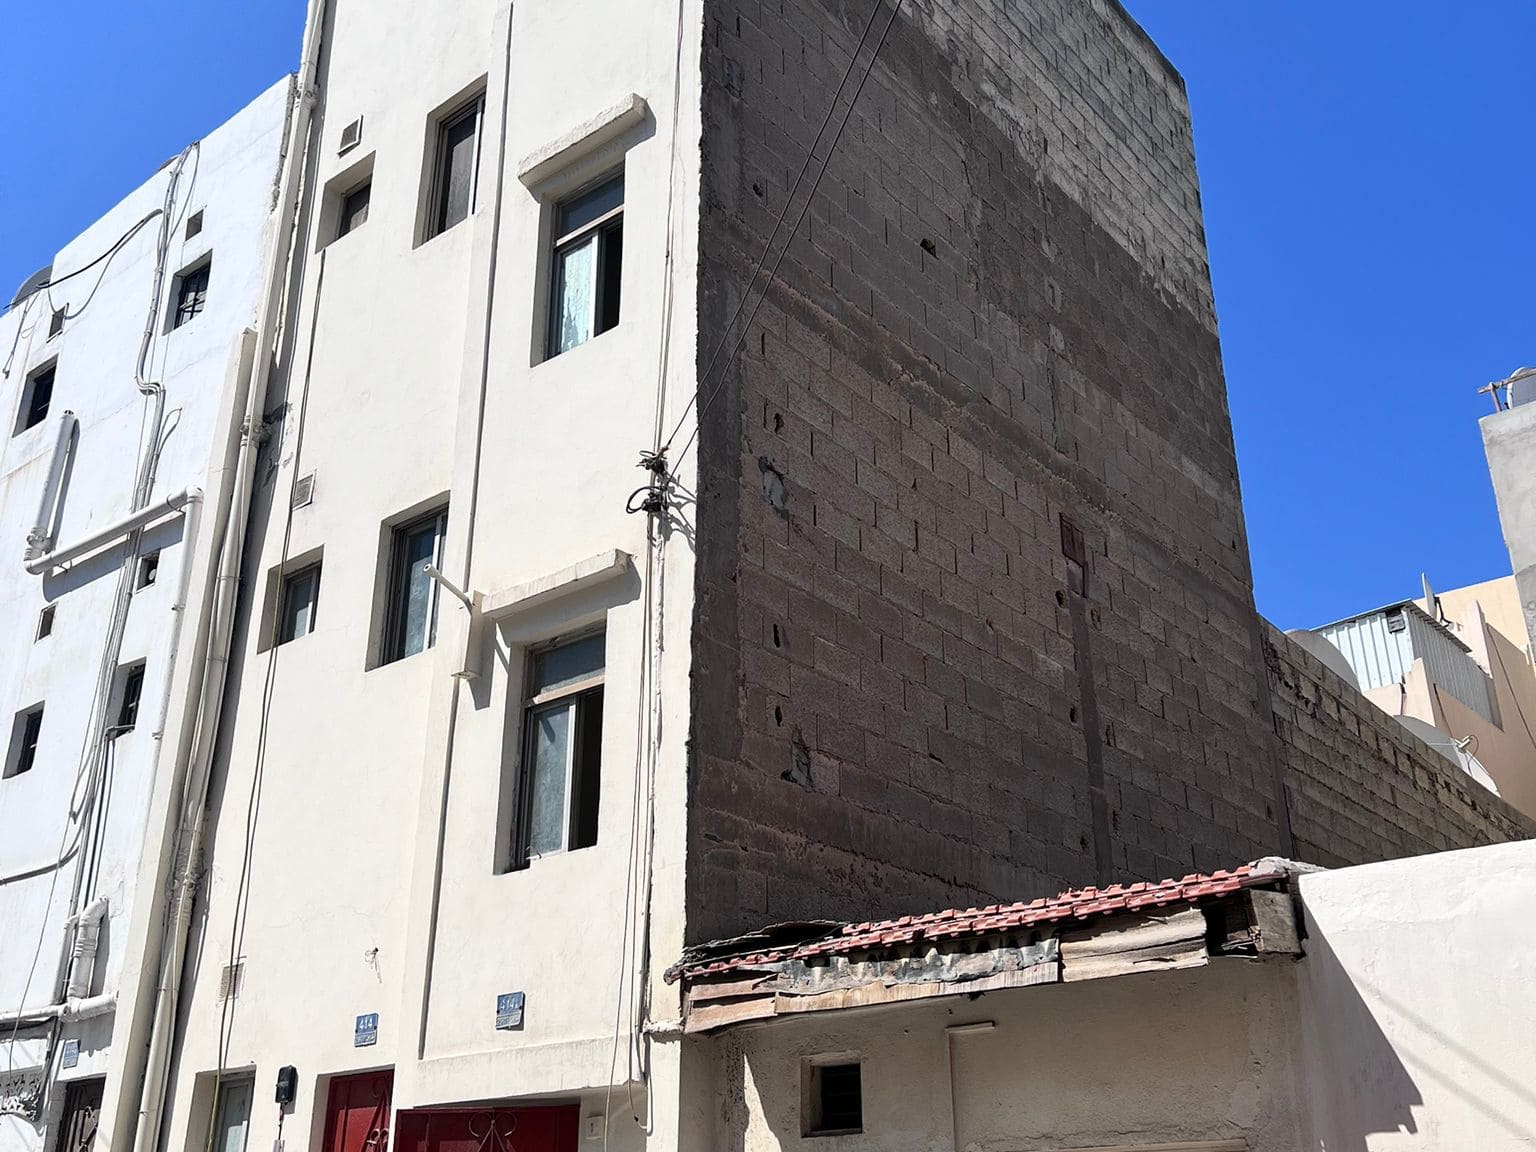 A bare side wall of the Salmaniya building with no windows, adjacent to a structure with a corrugated metal awning, under a clear blue sky.